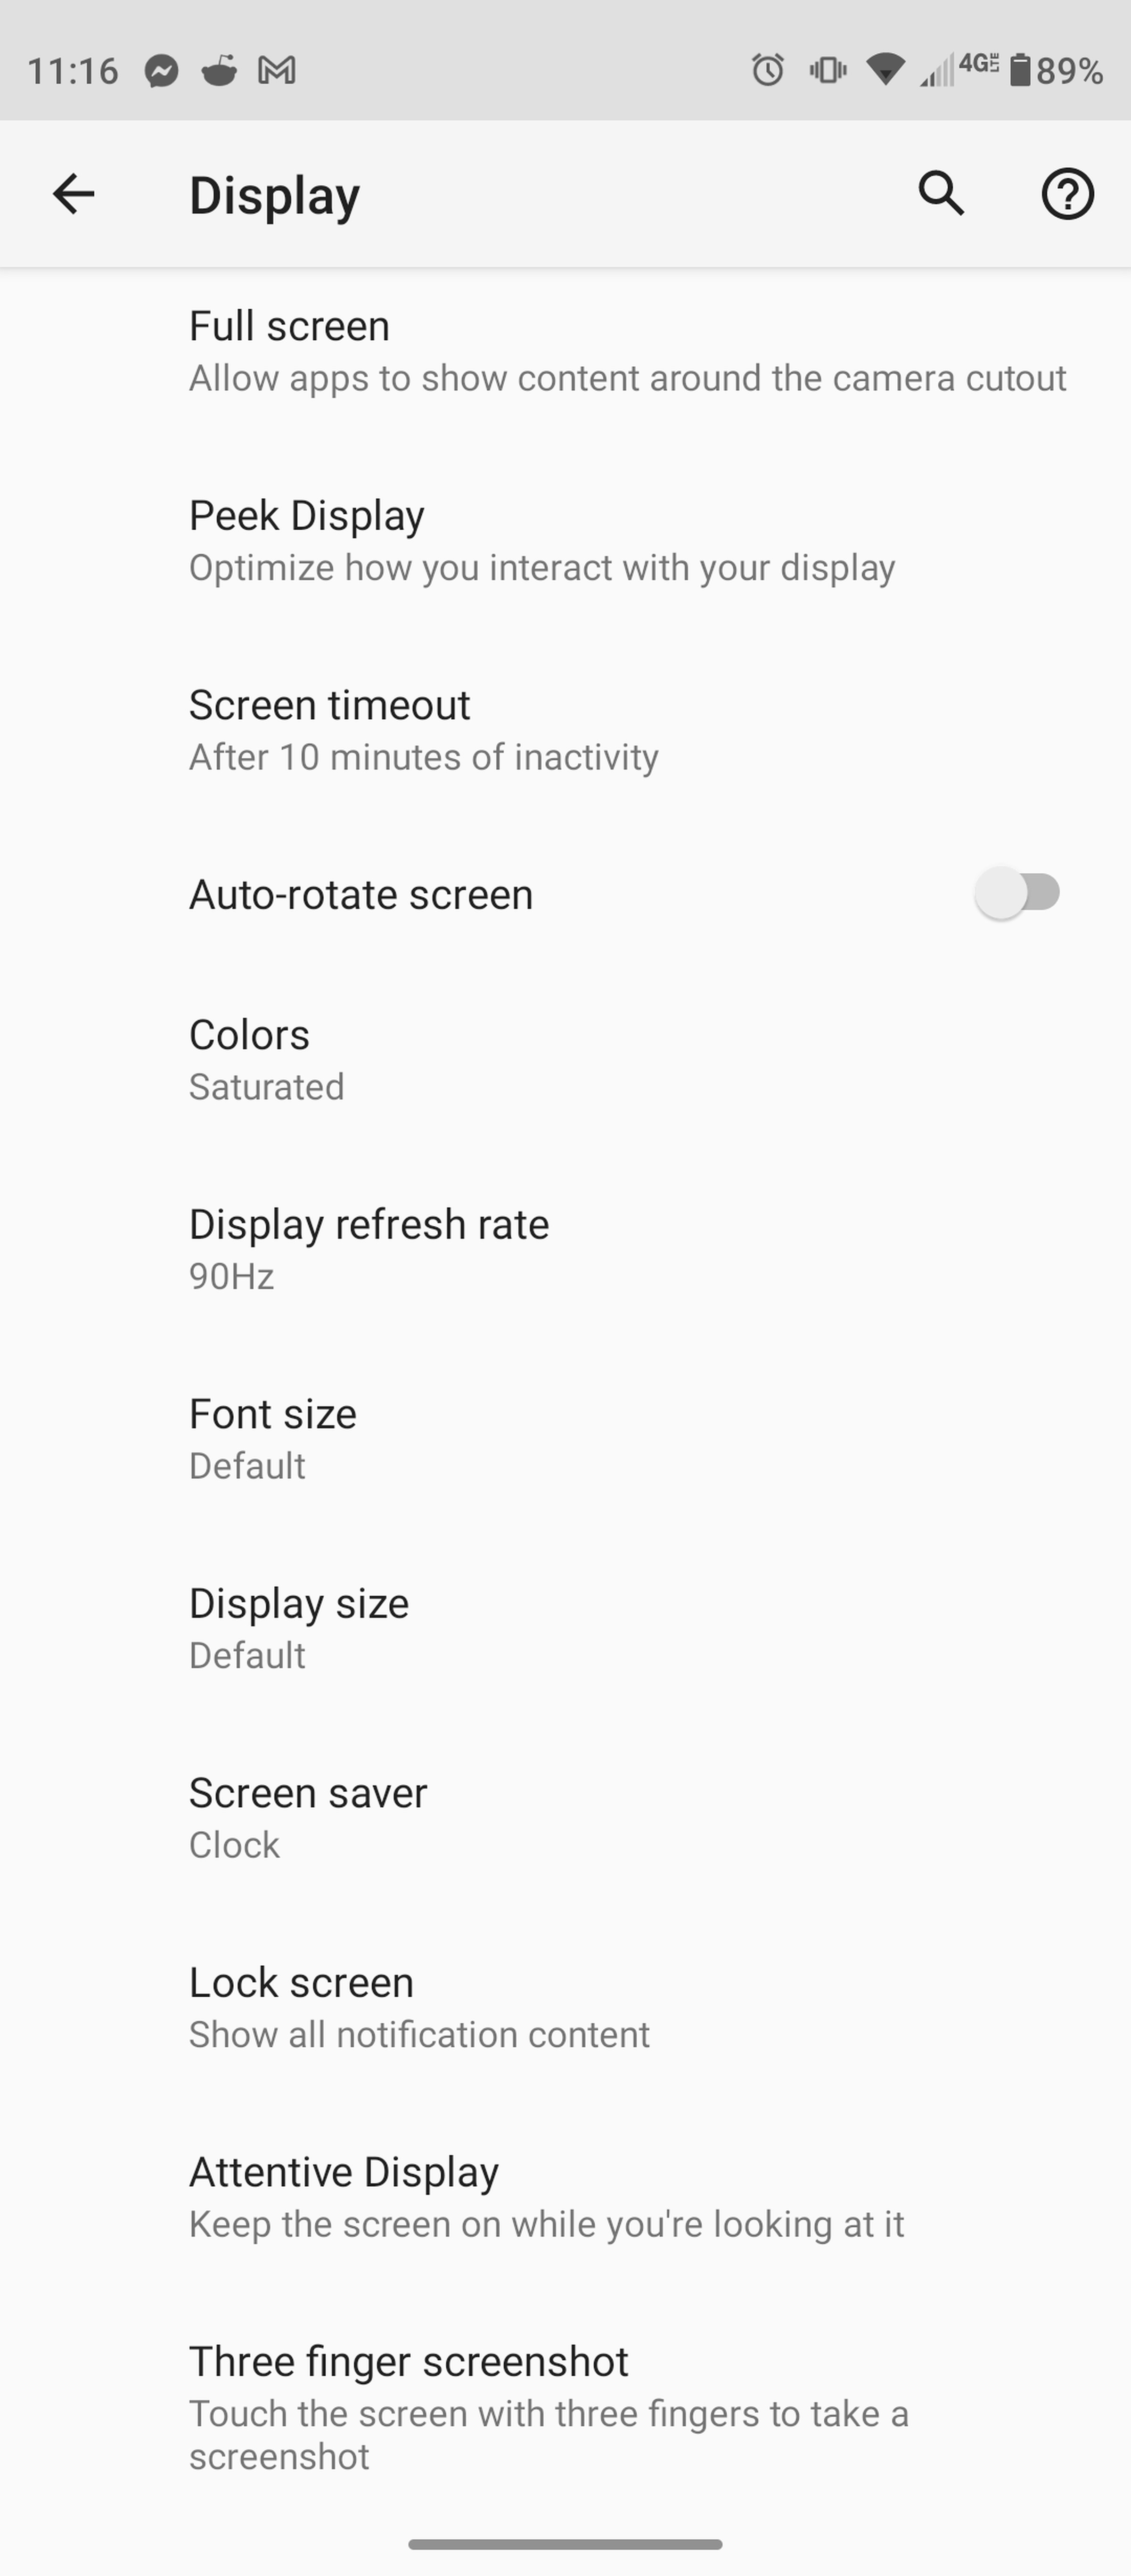 Find the screen saver option on the display settings page. It may be nested under “Advanced” settings.